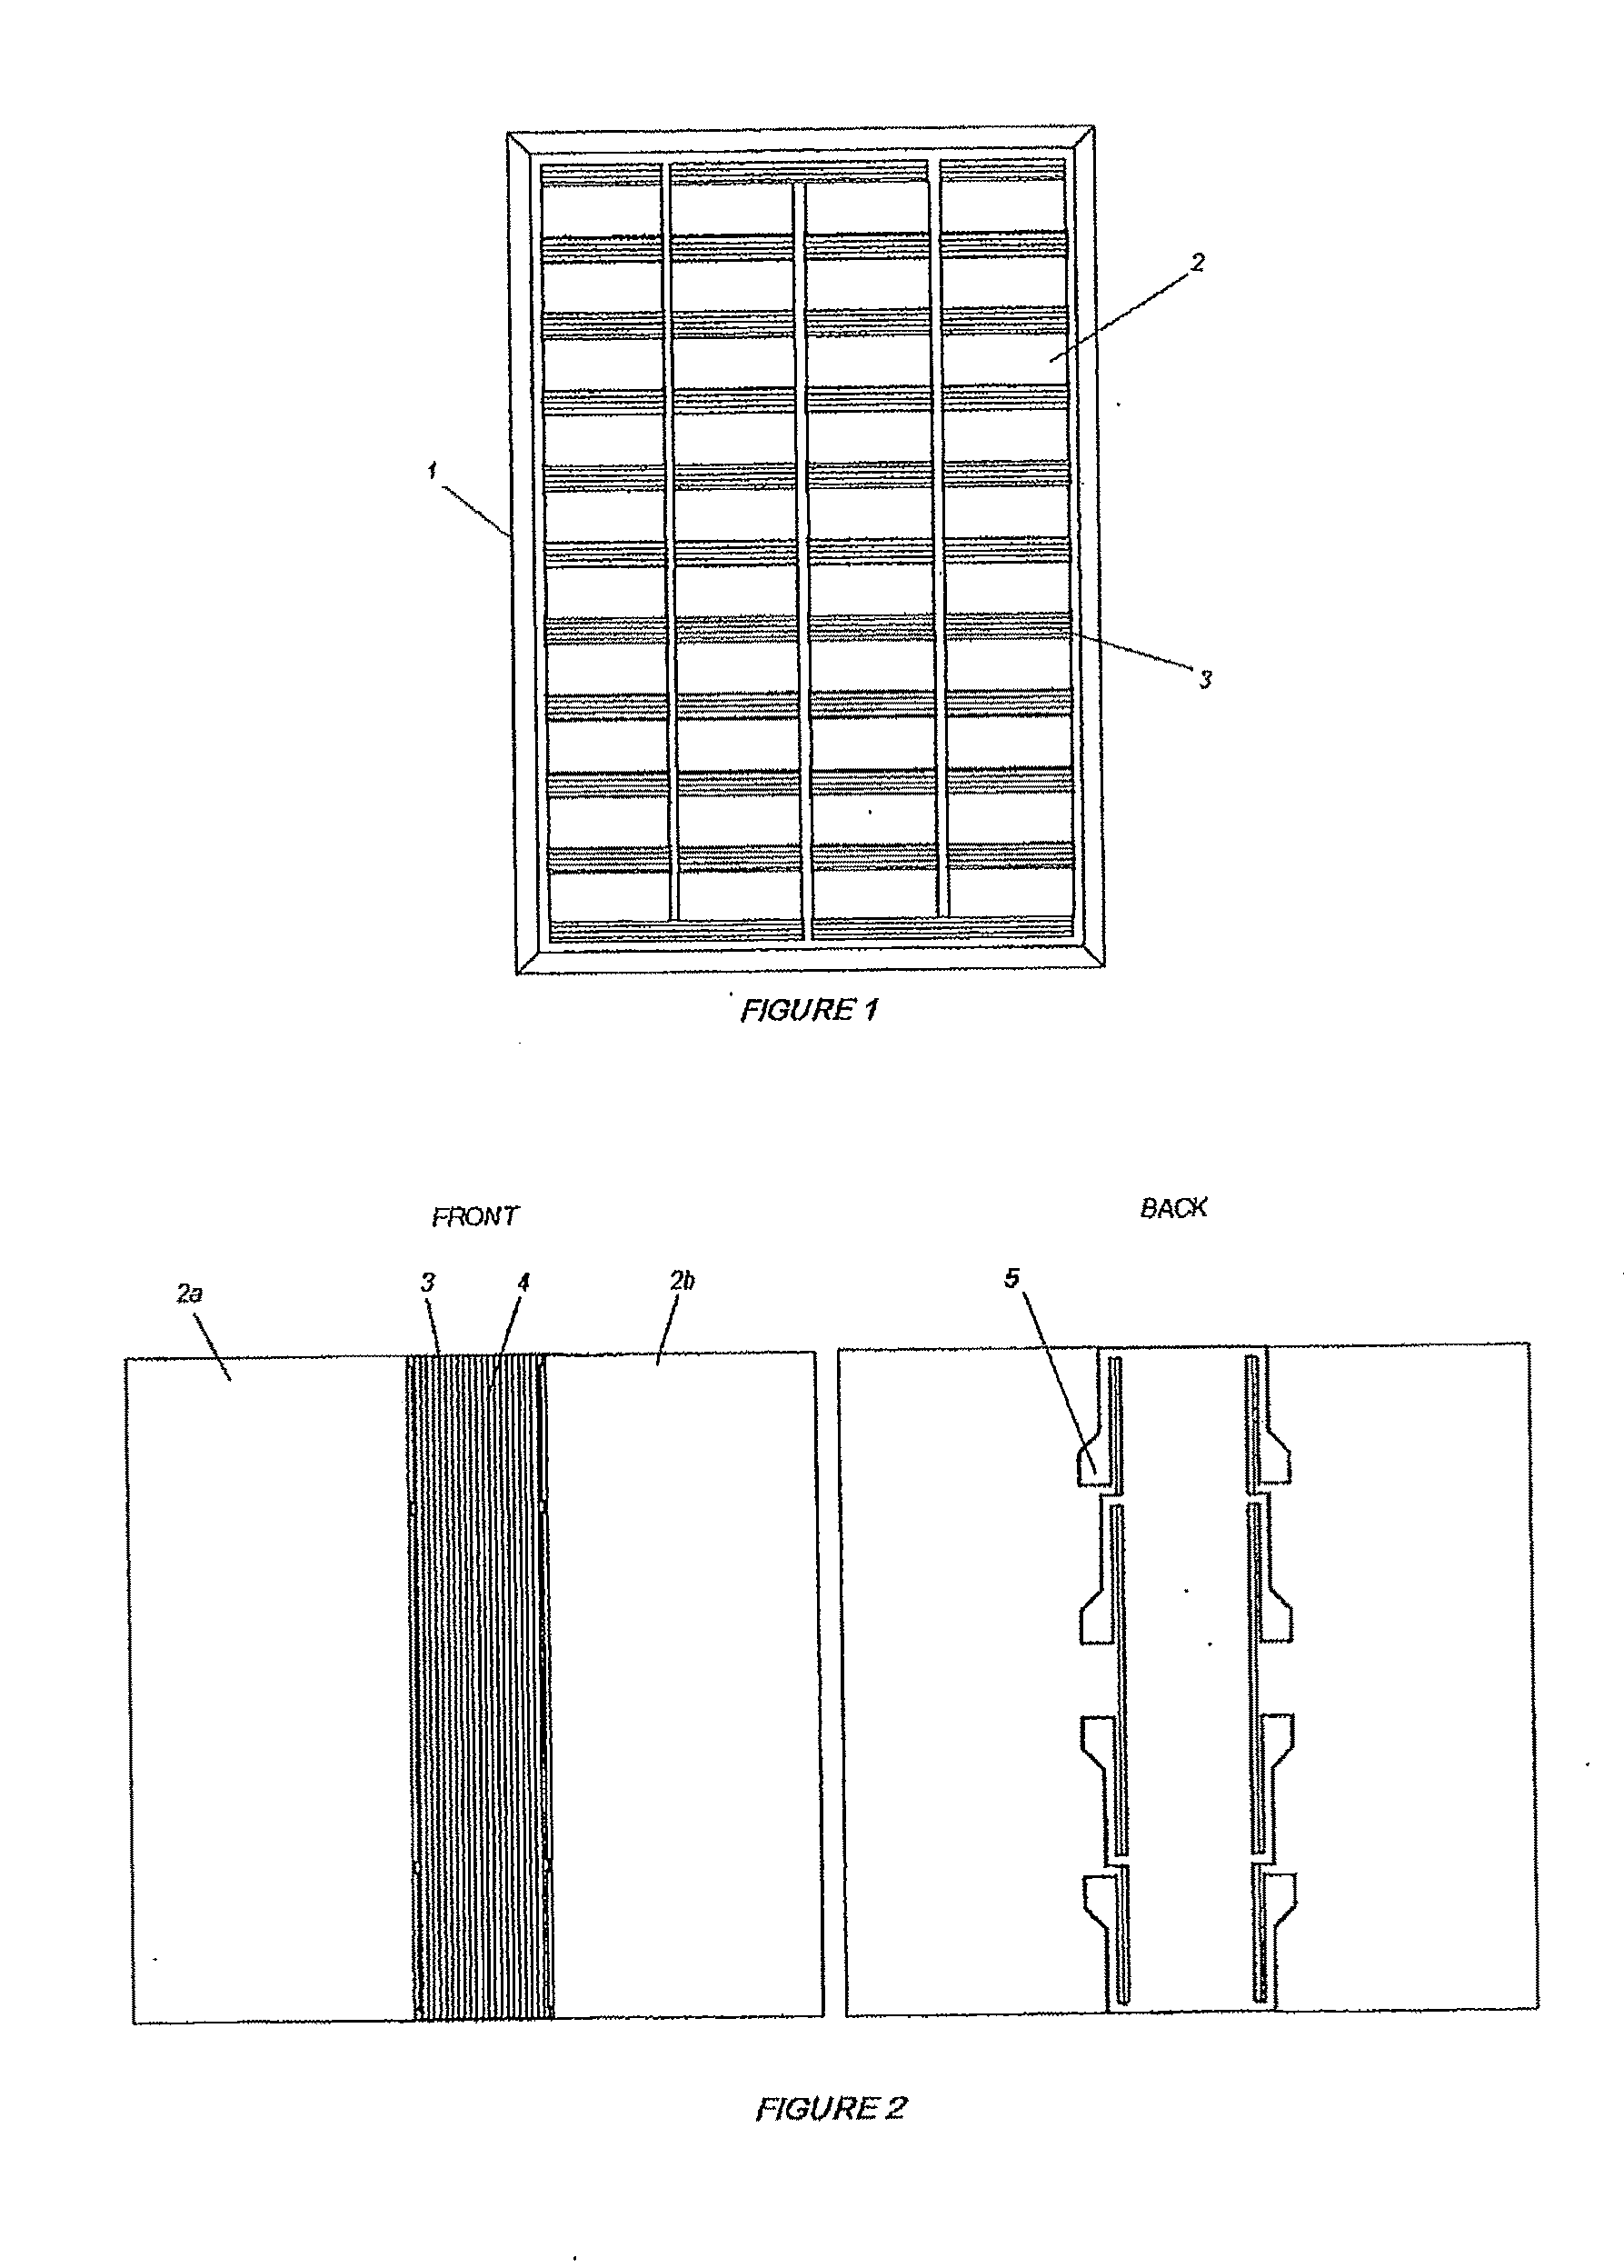 Interconnecting reflector ribbon for solar cell modules